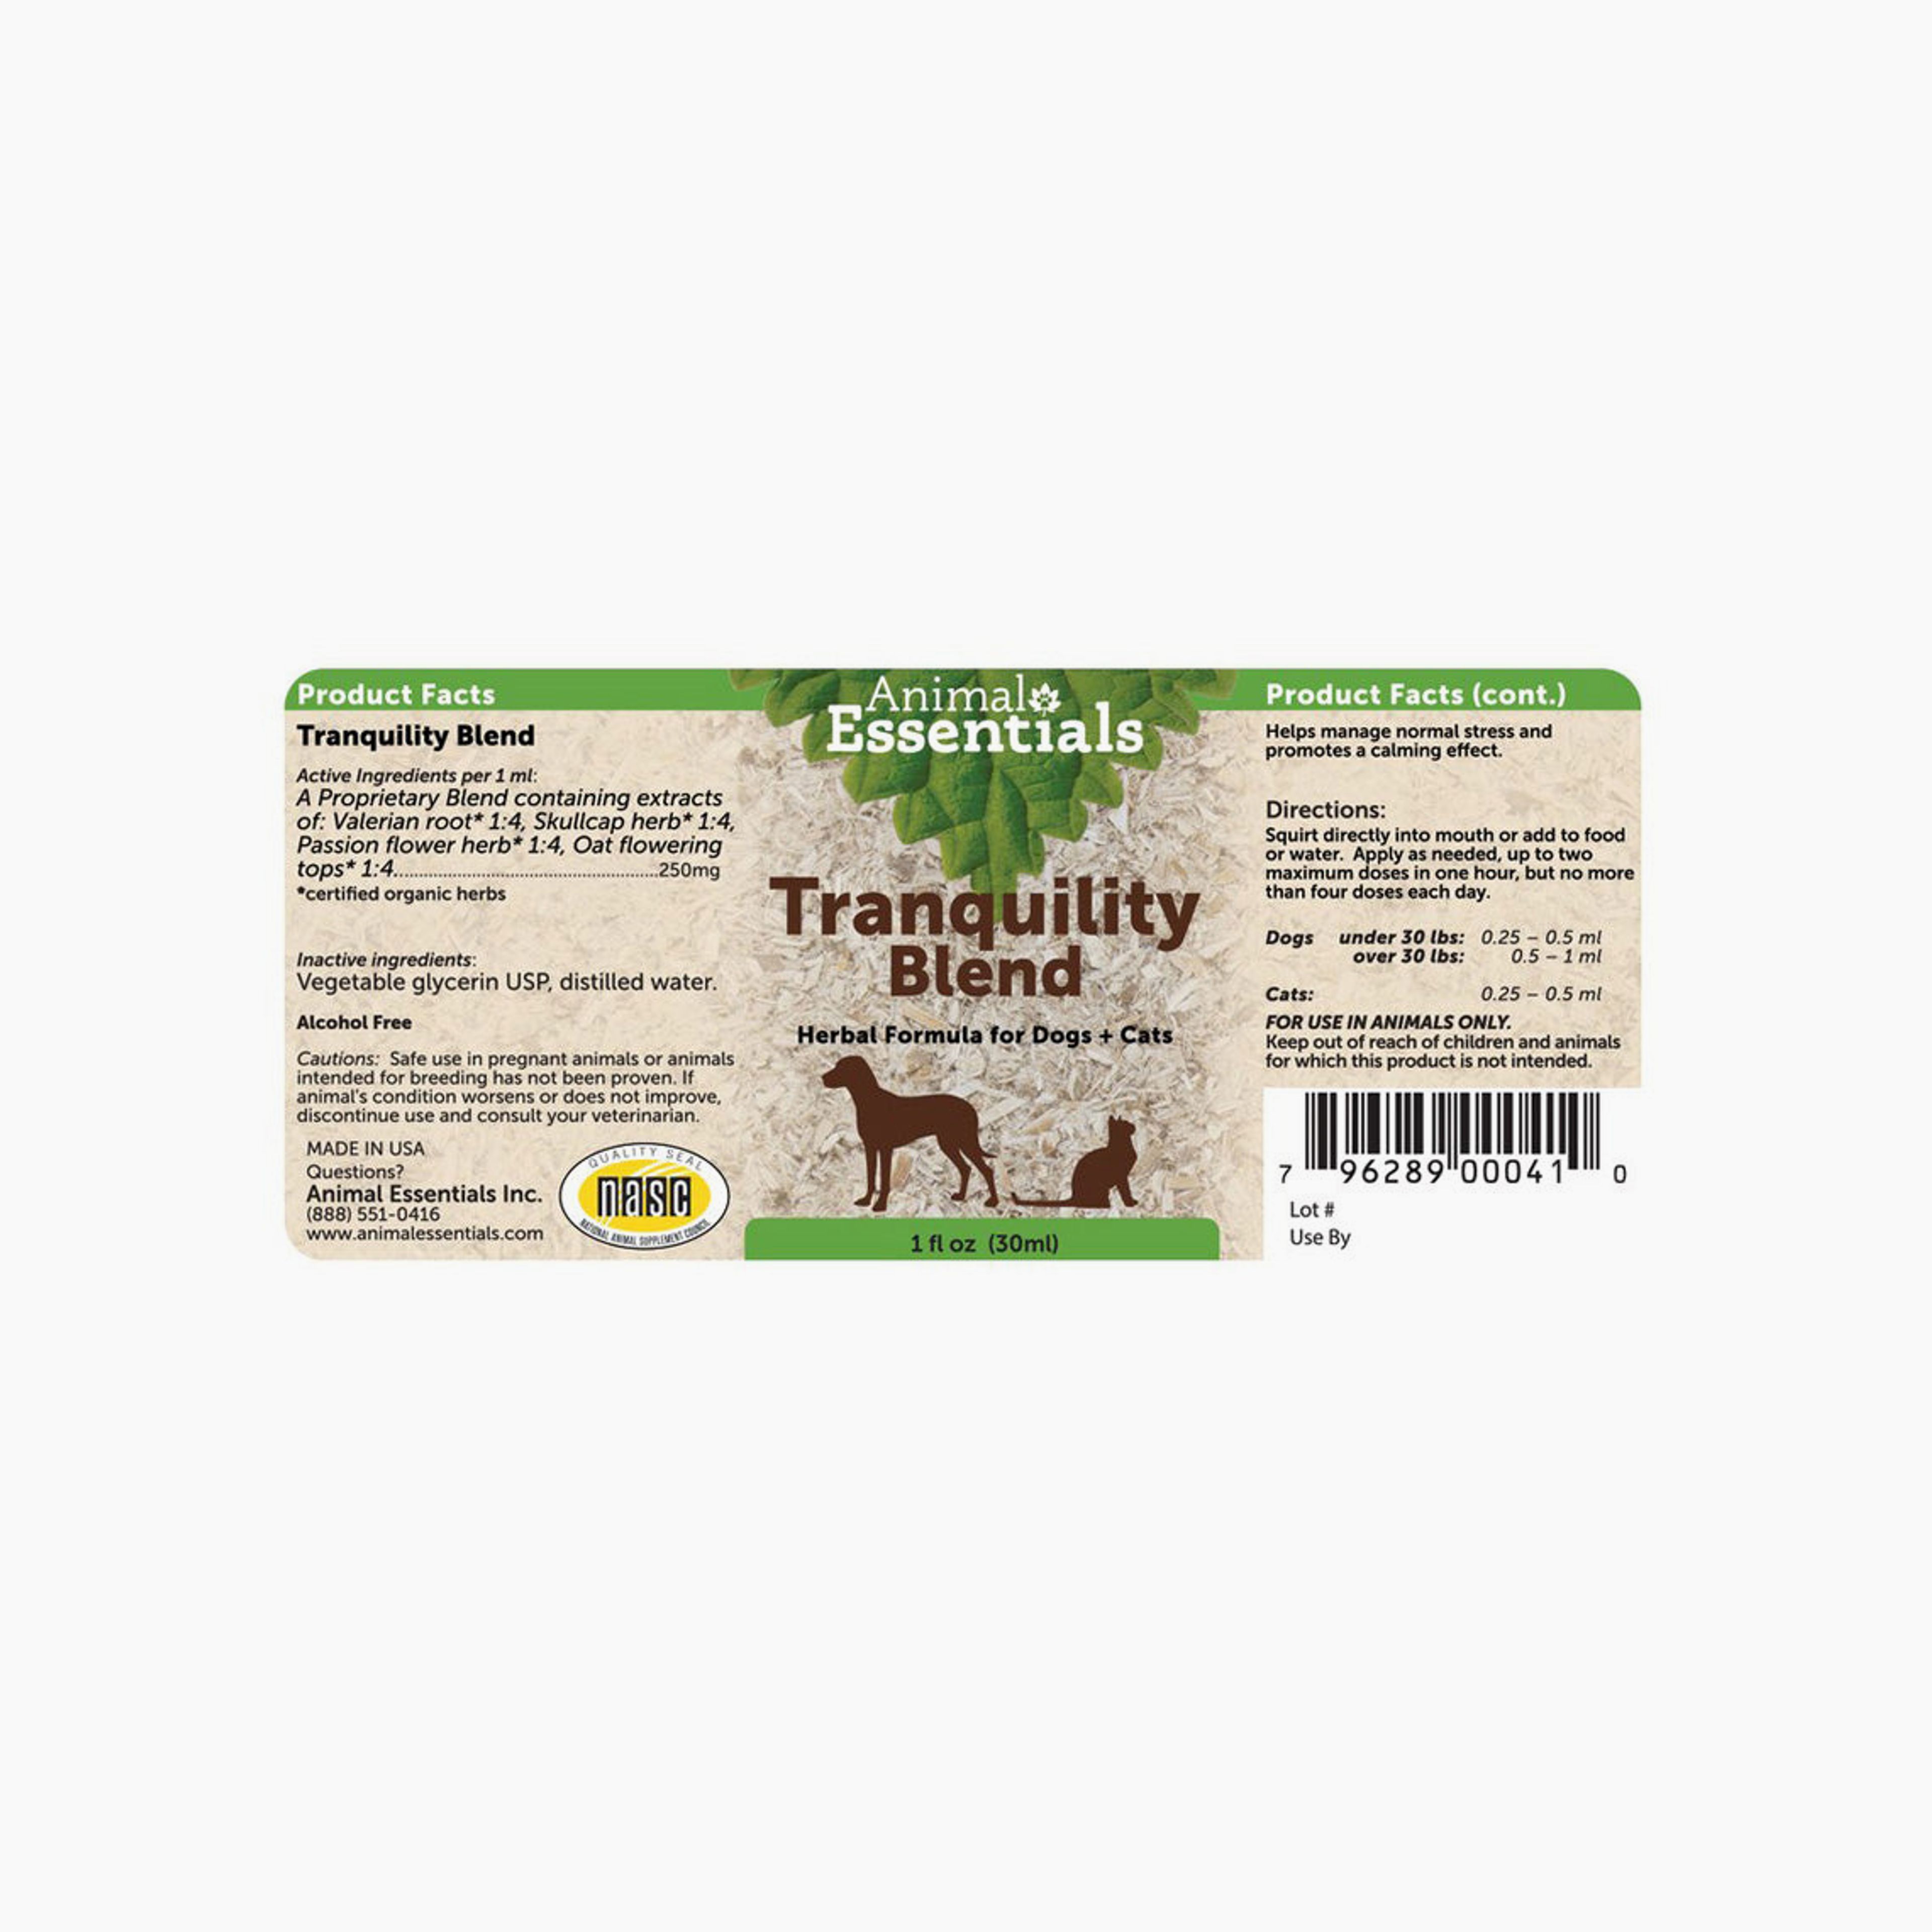 Animal Essentials Tranquility Blend Anxiety Herbal Liquid Formula for Dogs & Cats